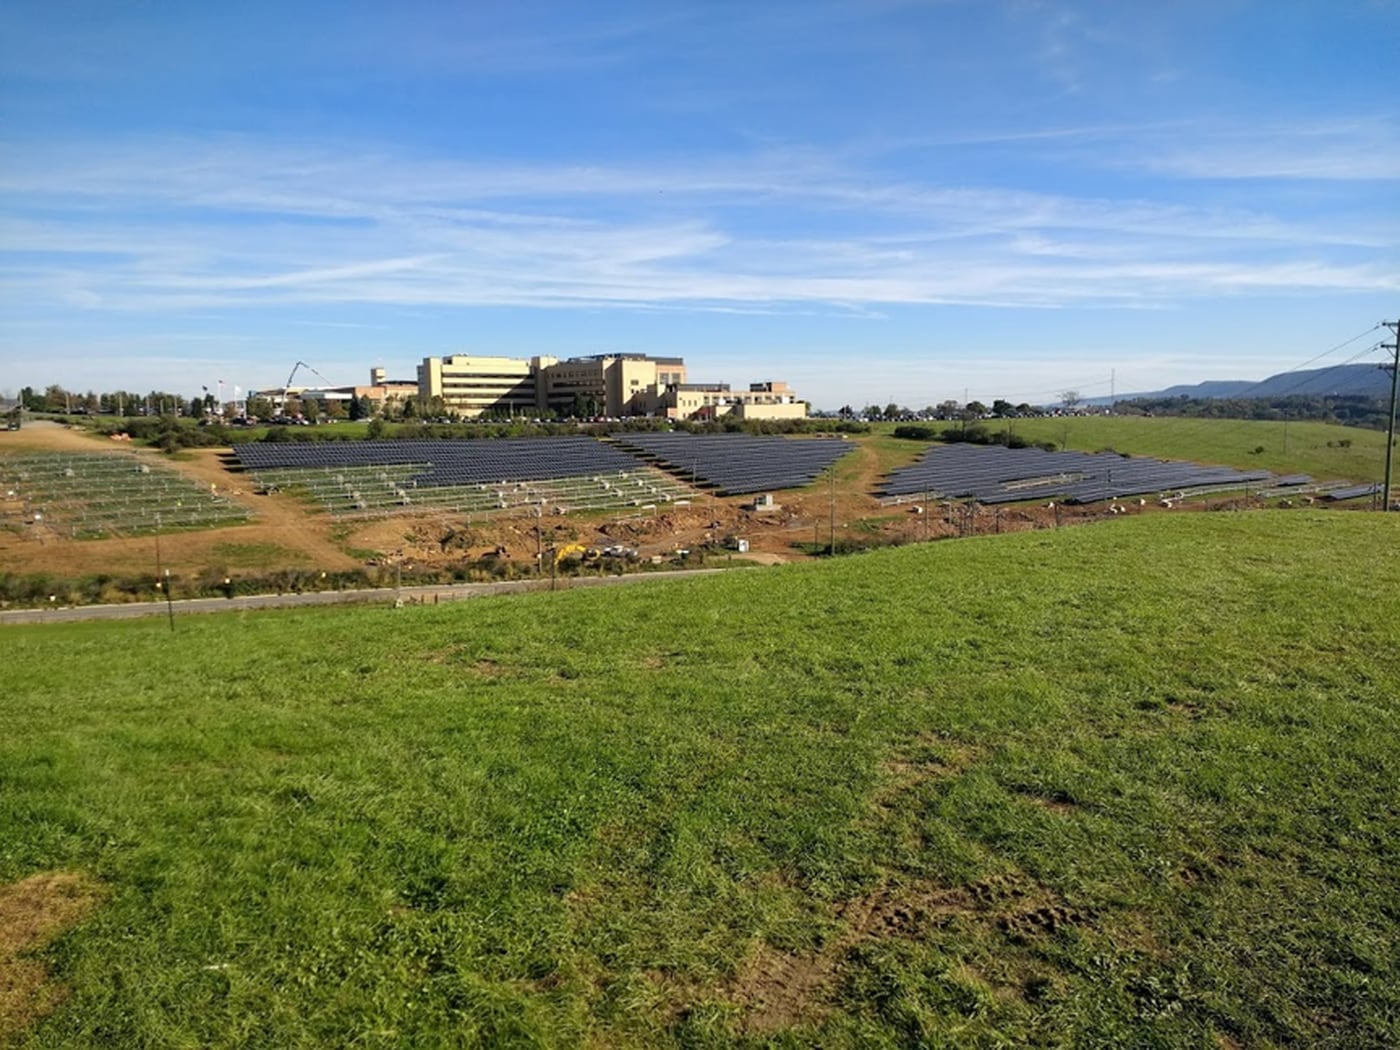 Penn State has 10 acres of solar panels at its University Park campus, which generate less than 1% of its electricity. The new 500-acre array will generate 25% of its electricity.